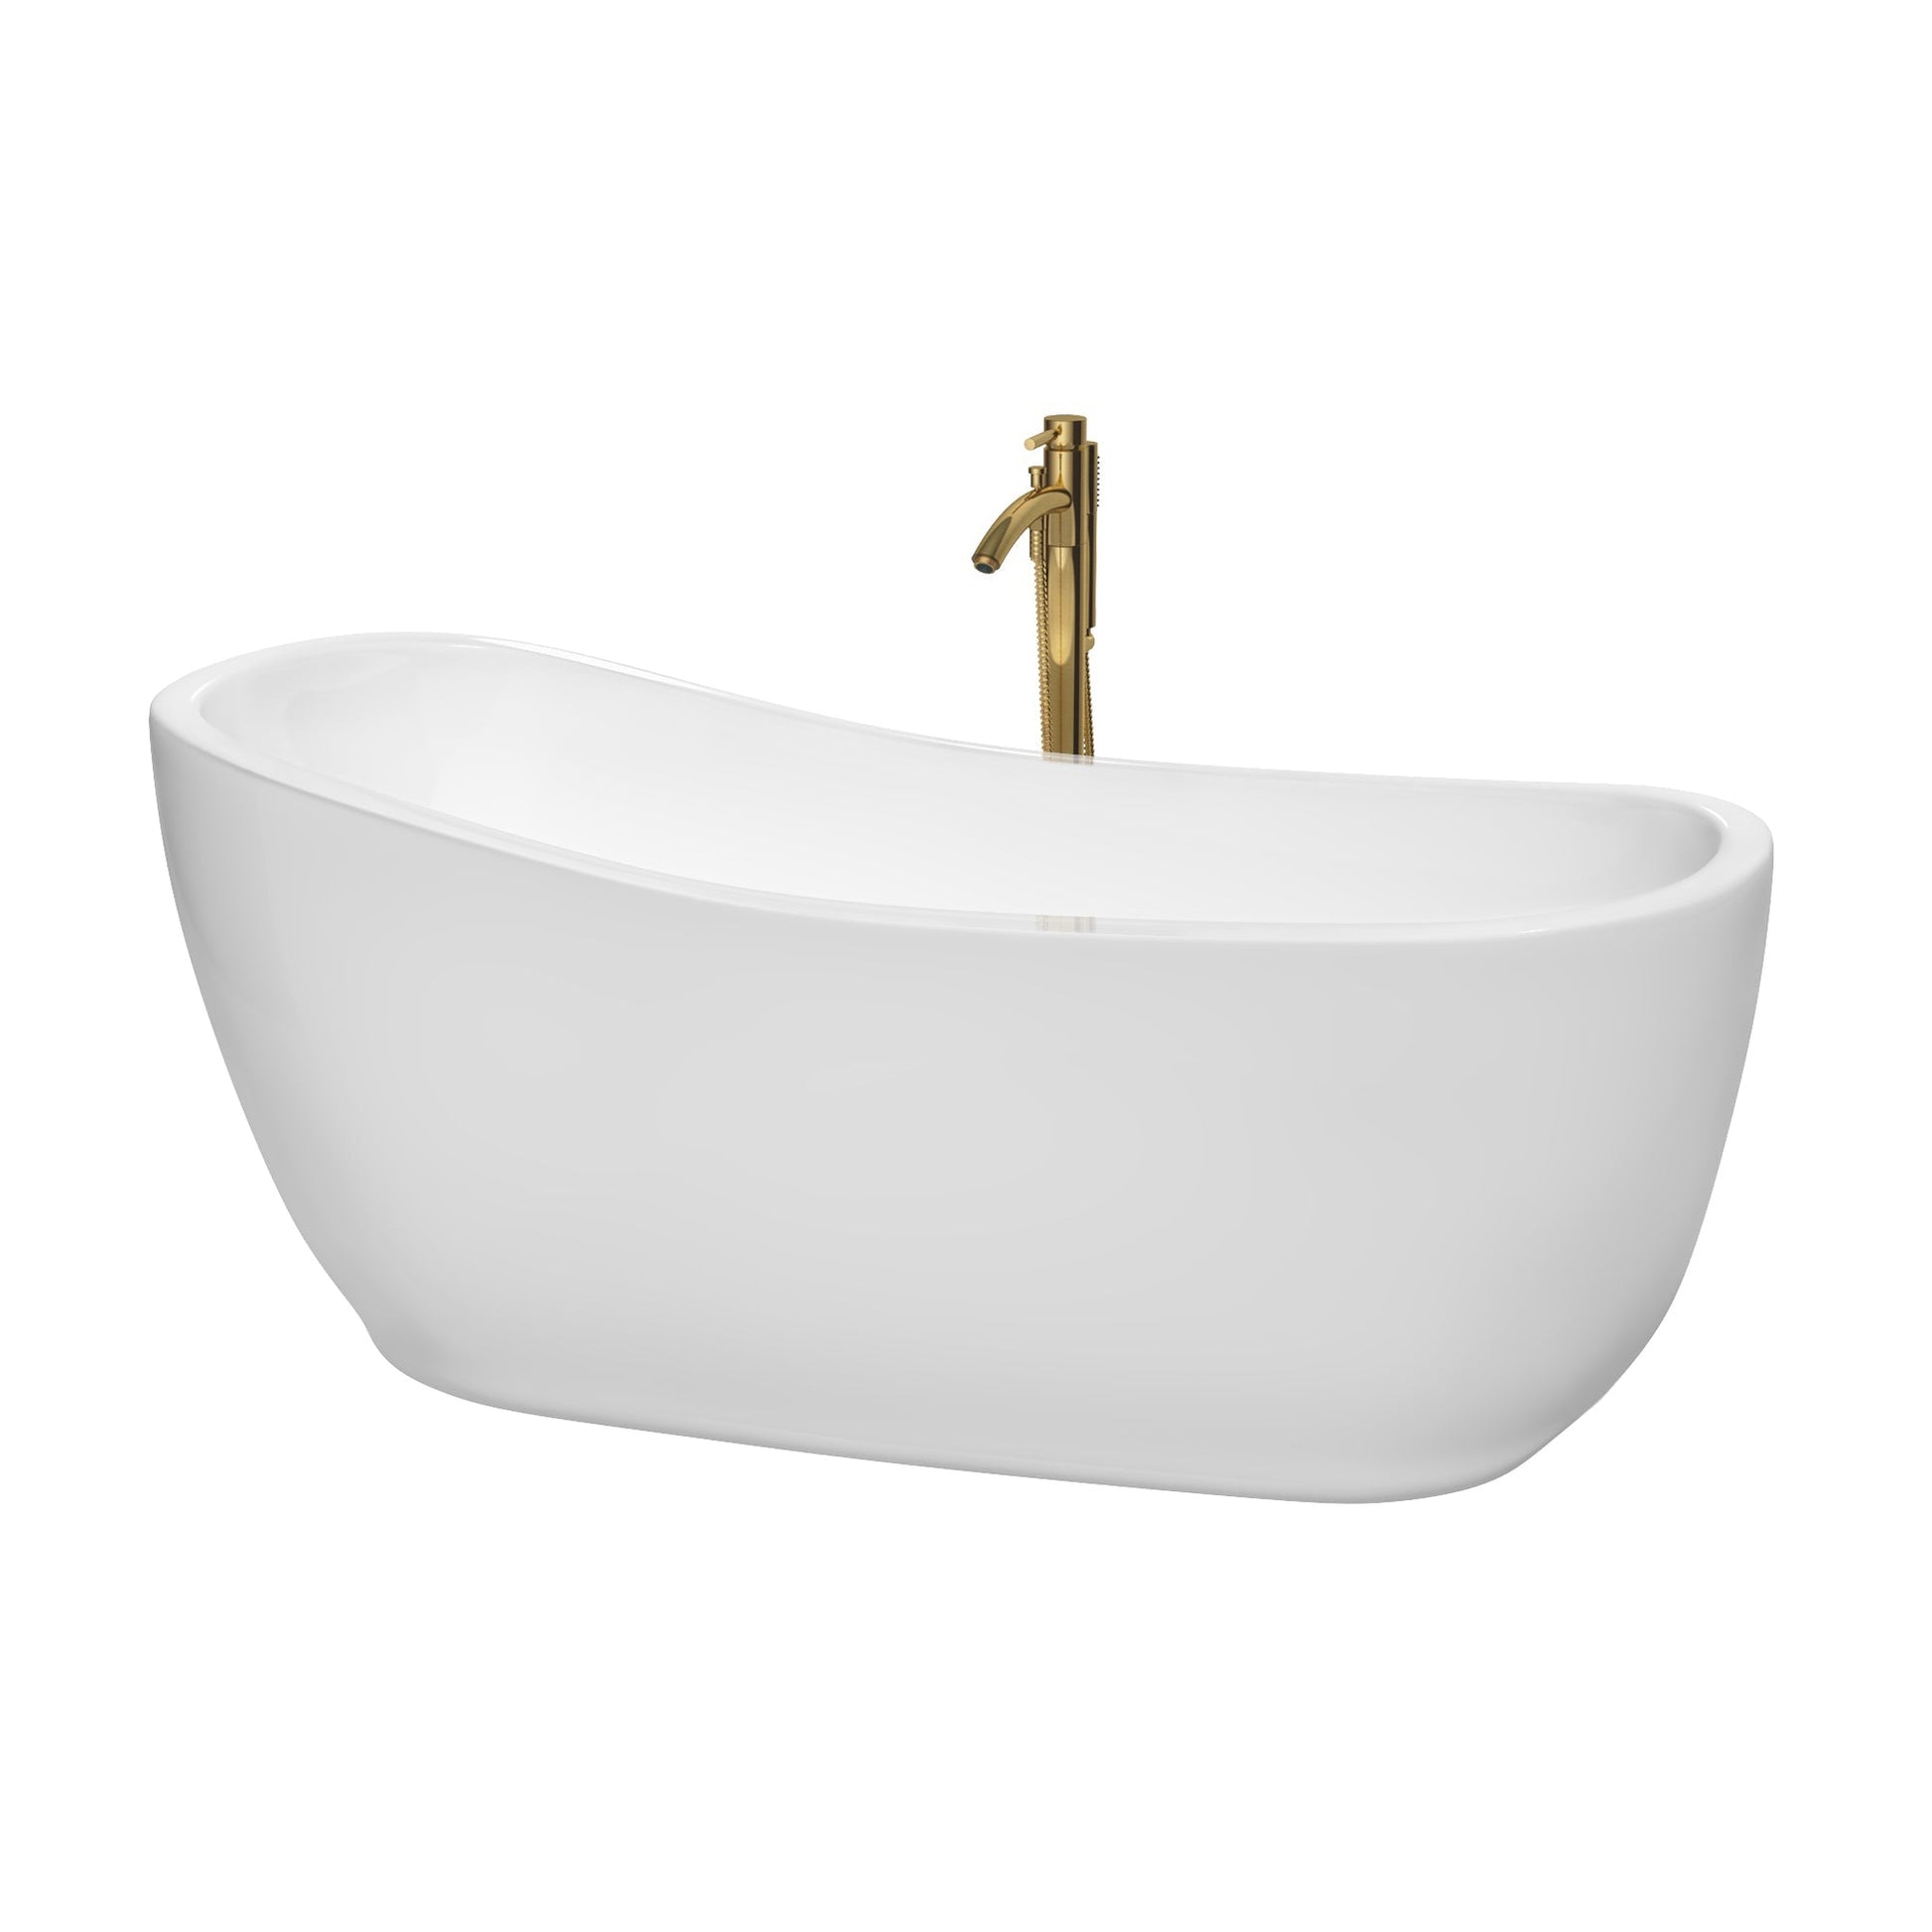 Wyndham Collection Margaret 66" Freestanding Bathtub in White With Polished Chrome Trim and Floor Mounted Faucet in Brushed Gold